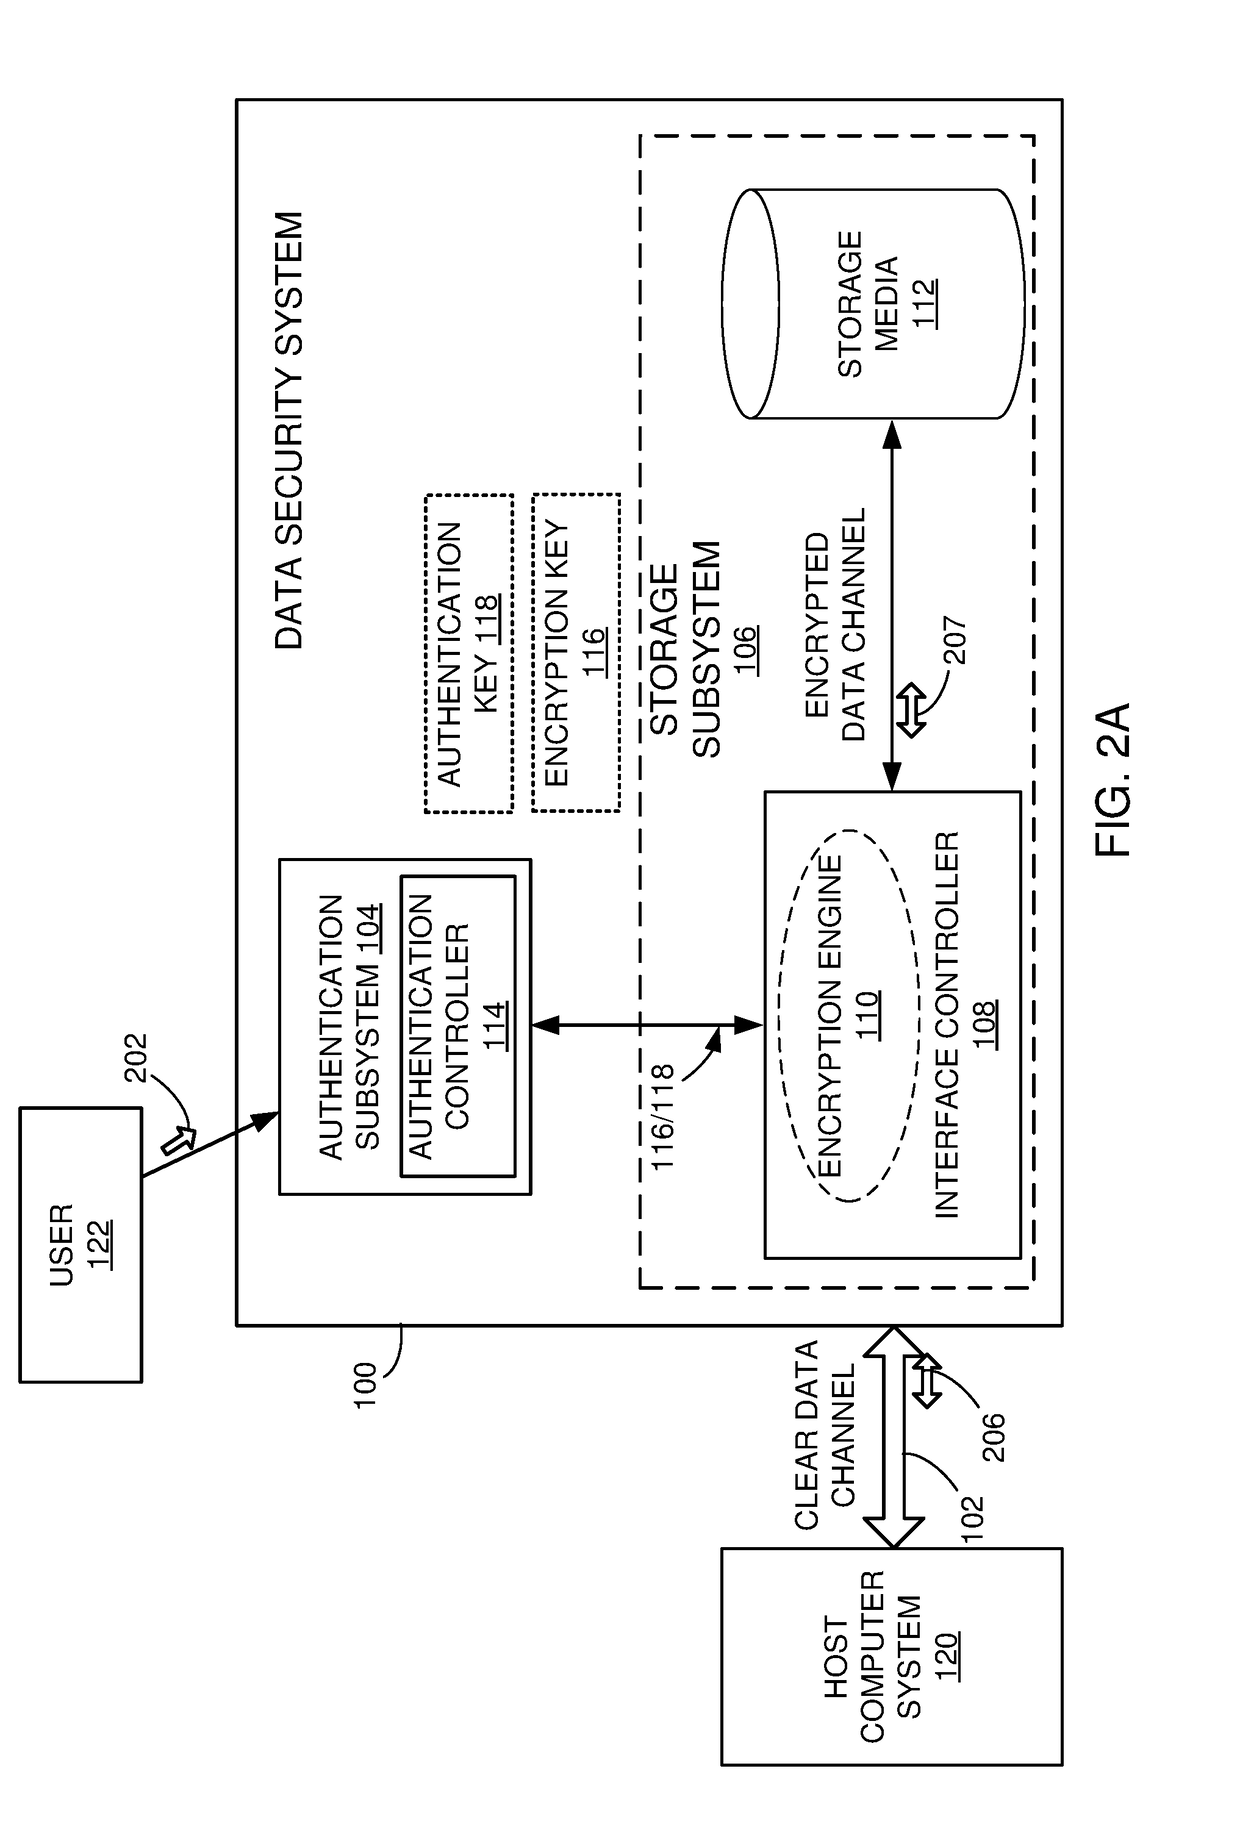 Management system for self-encrypting managed devices with embedded wireless user authentication